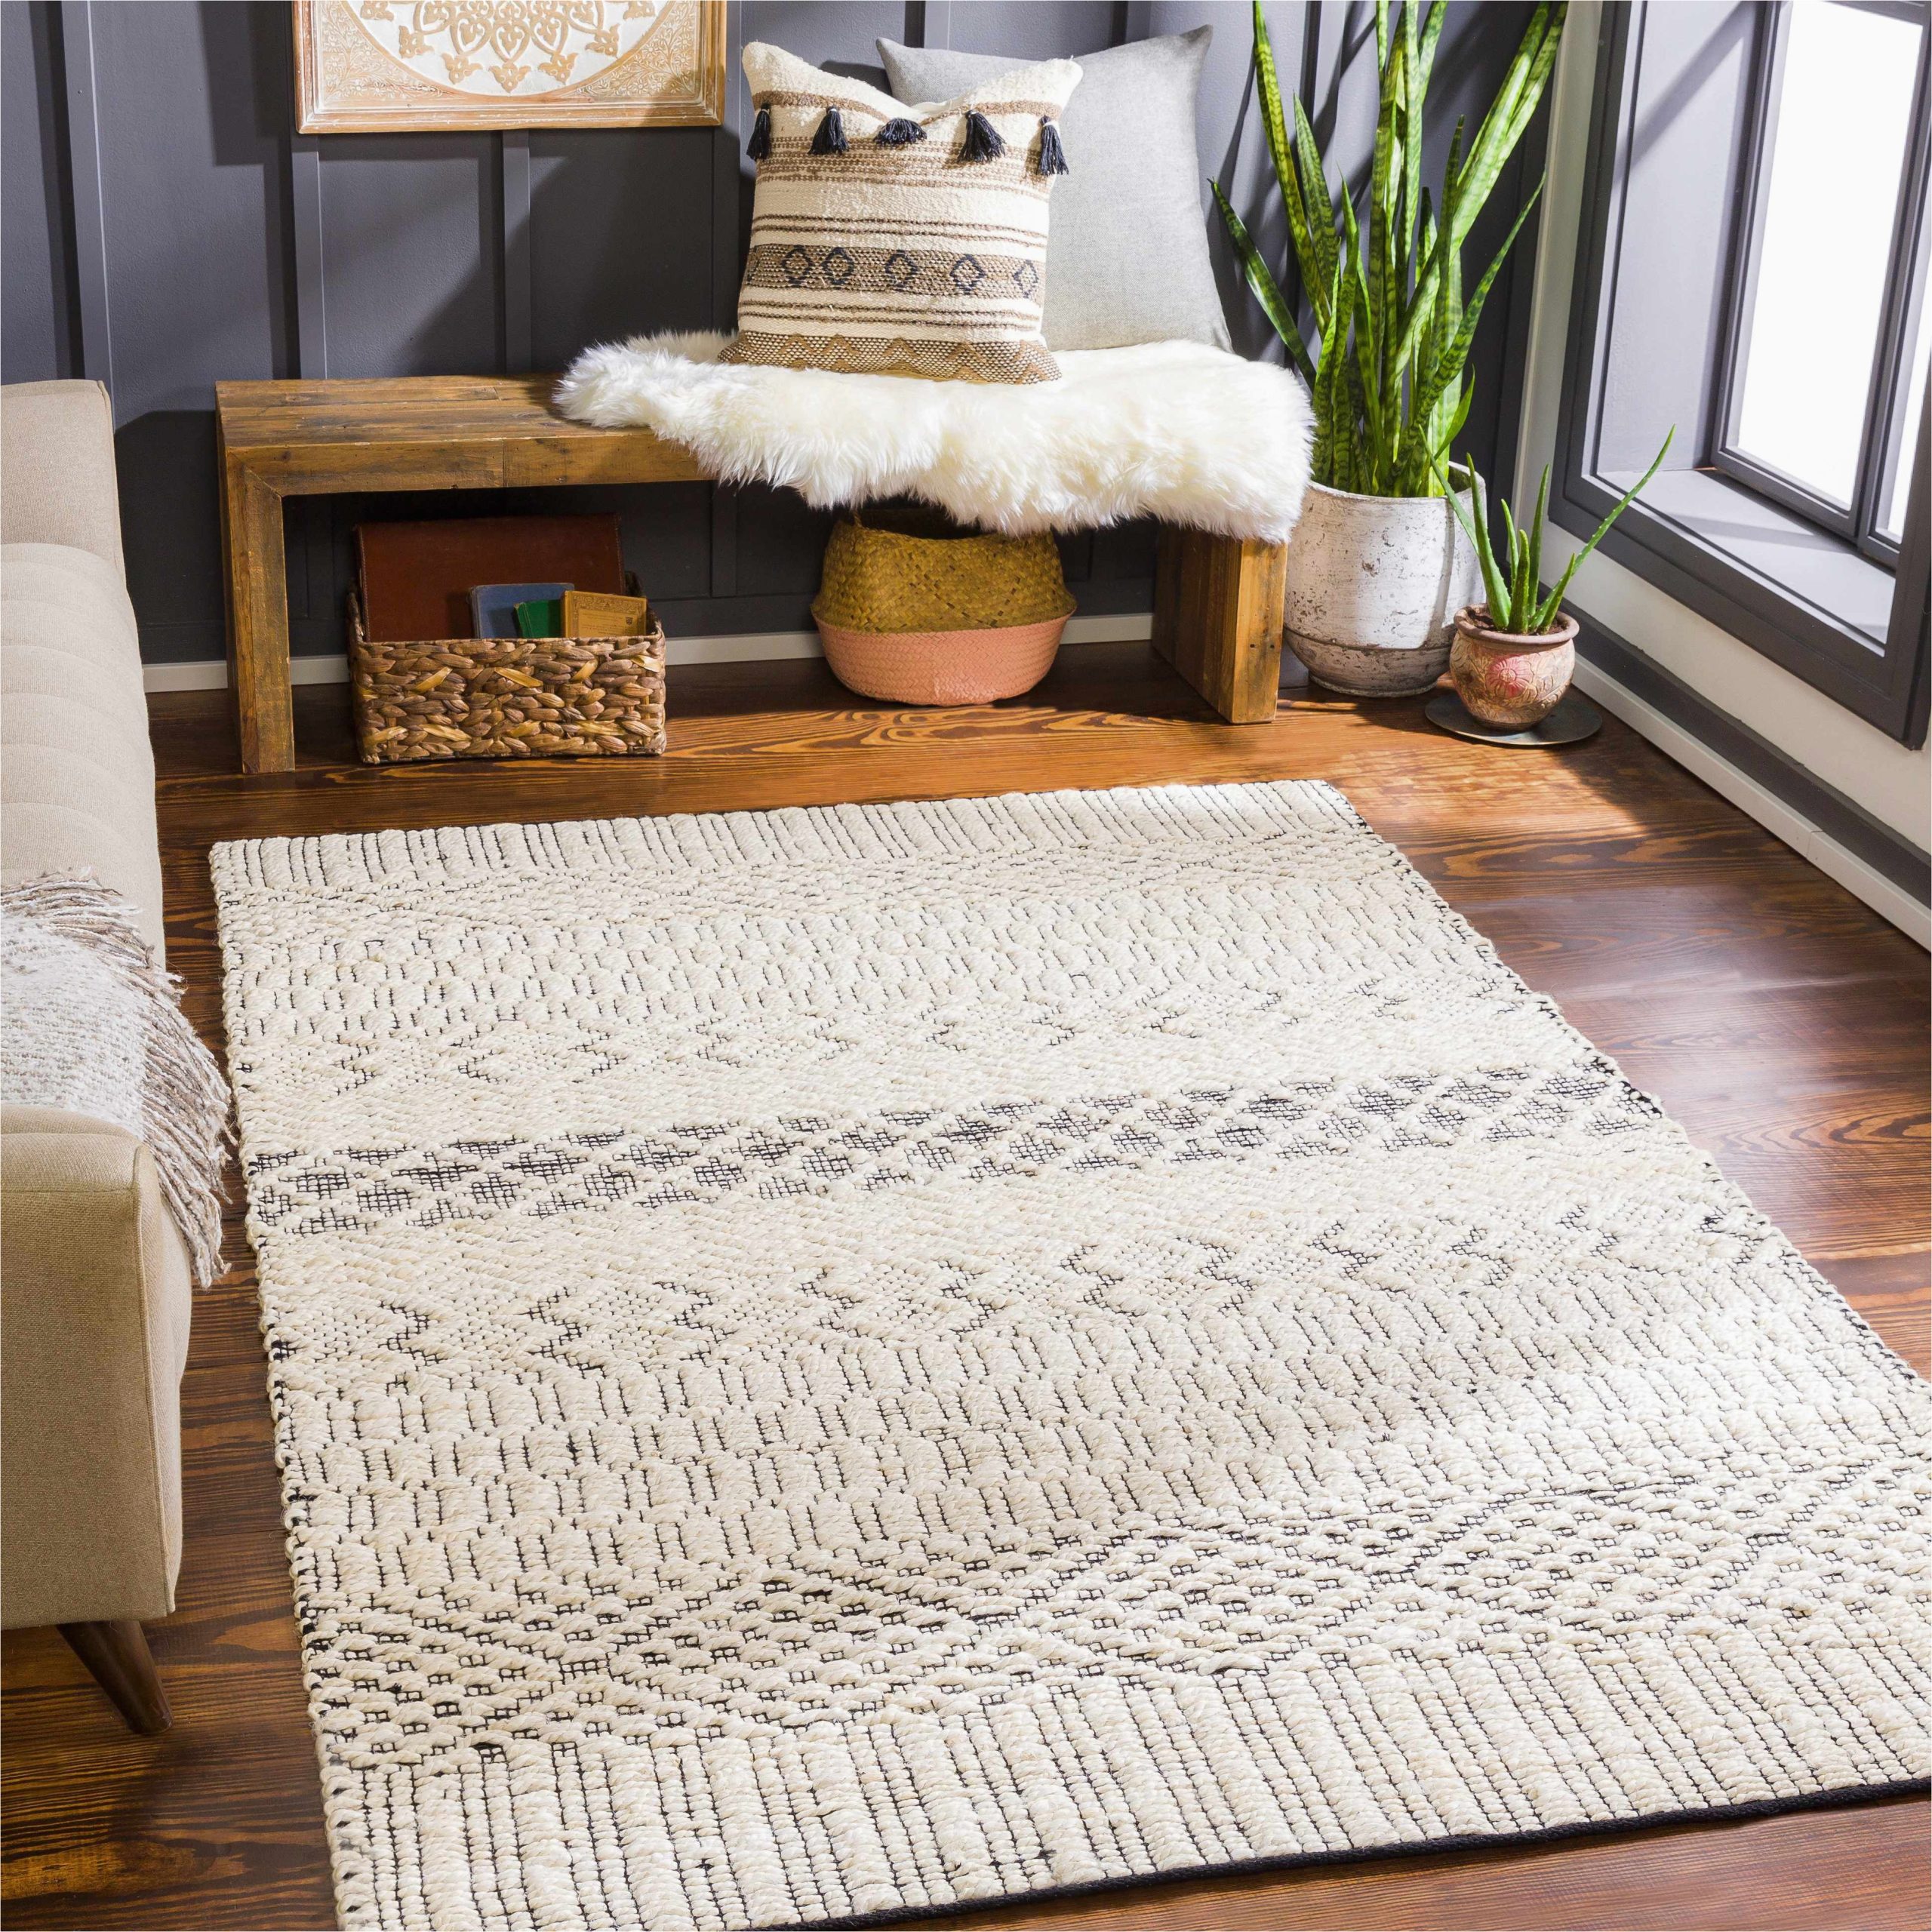 Jocelyn Parchment Handwoven Flatweave Wool White Charcoal area Rug Pin On Products